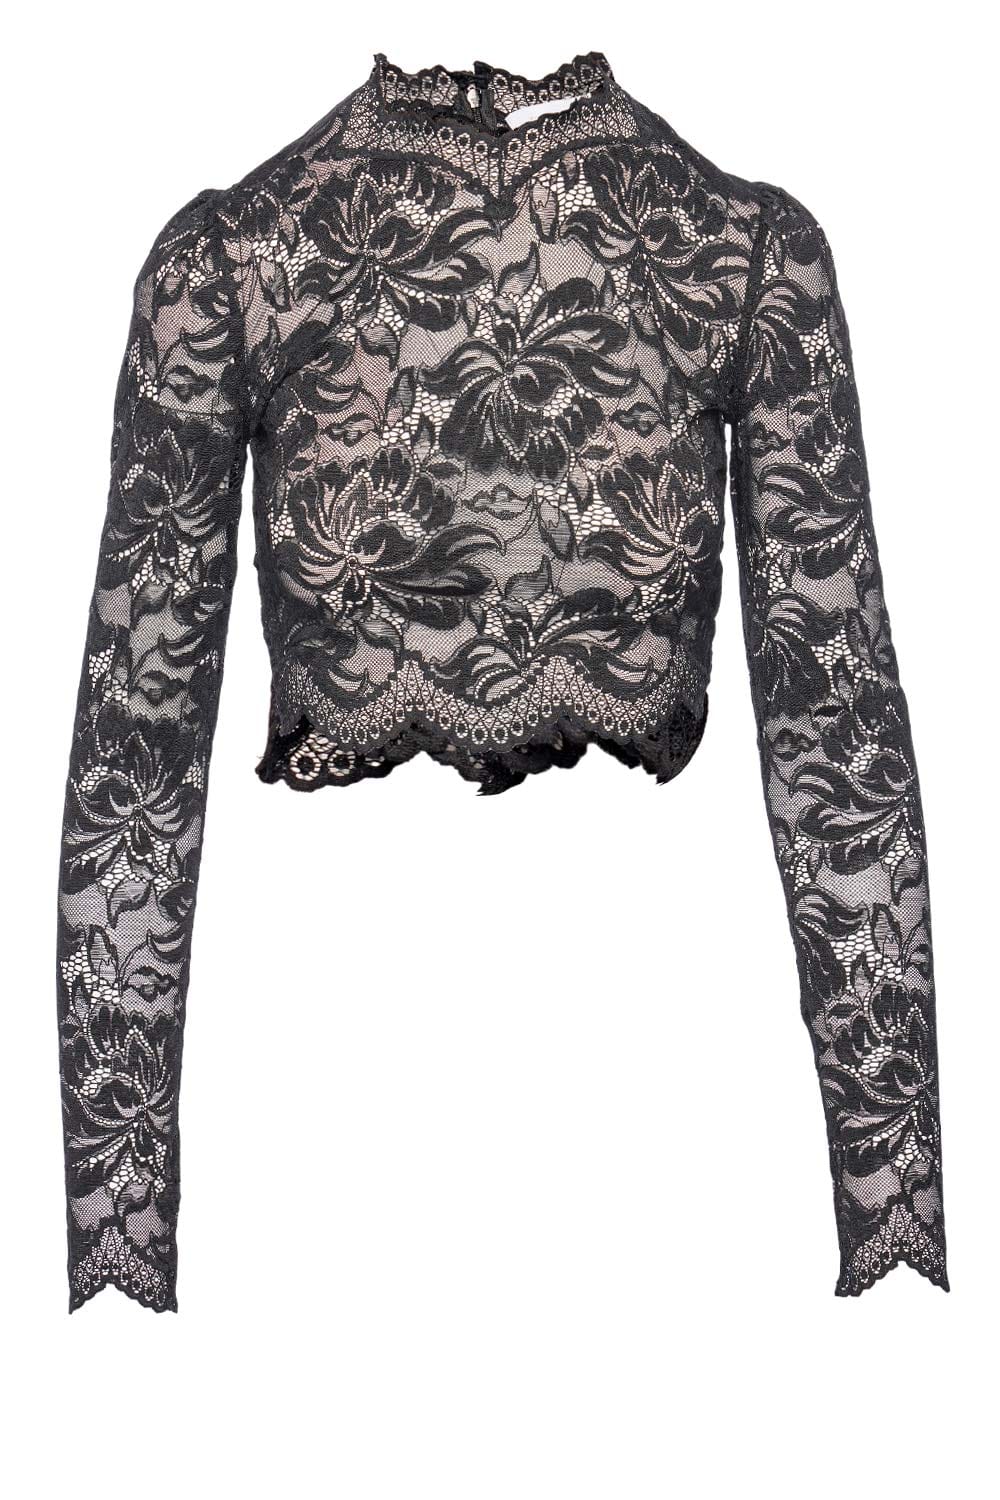 Paco Rabanne Haut Black Lace Long Sleeve Cropped Top